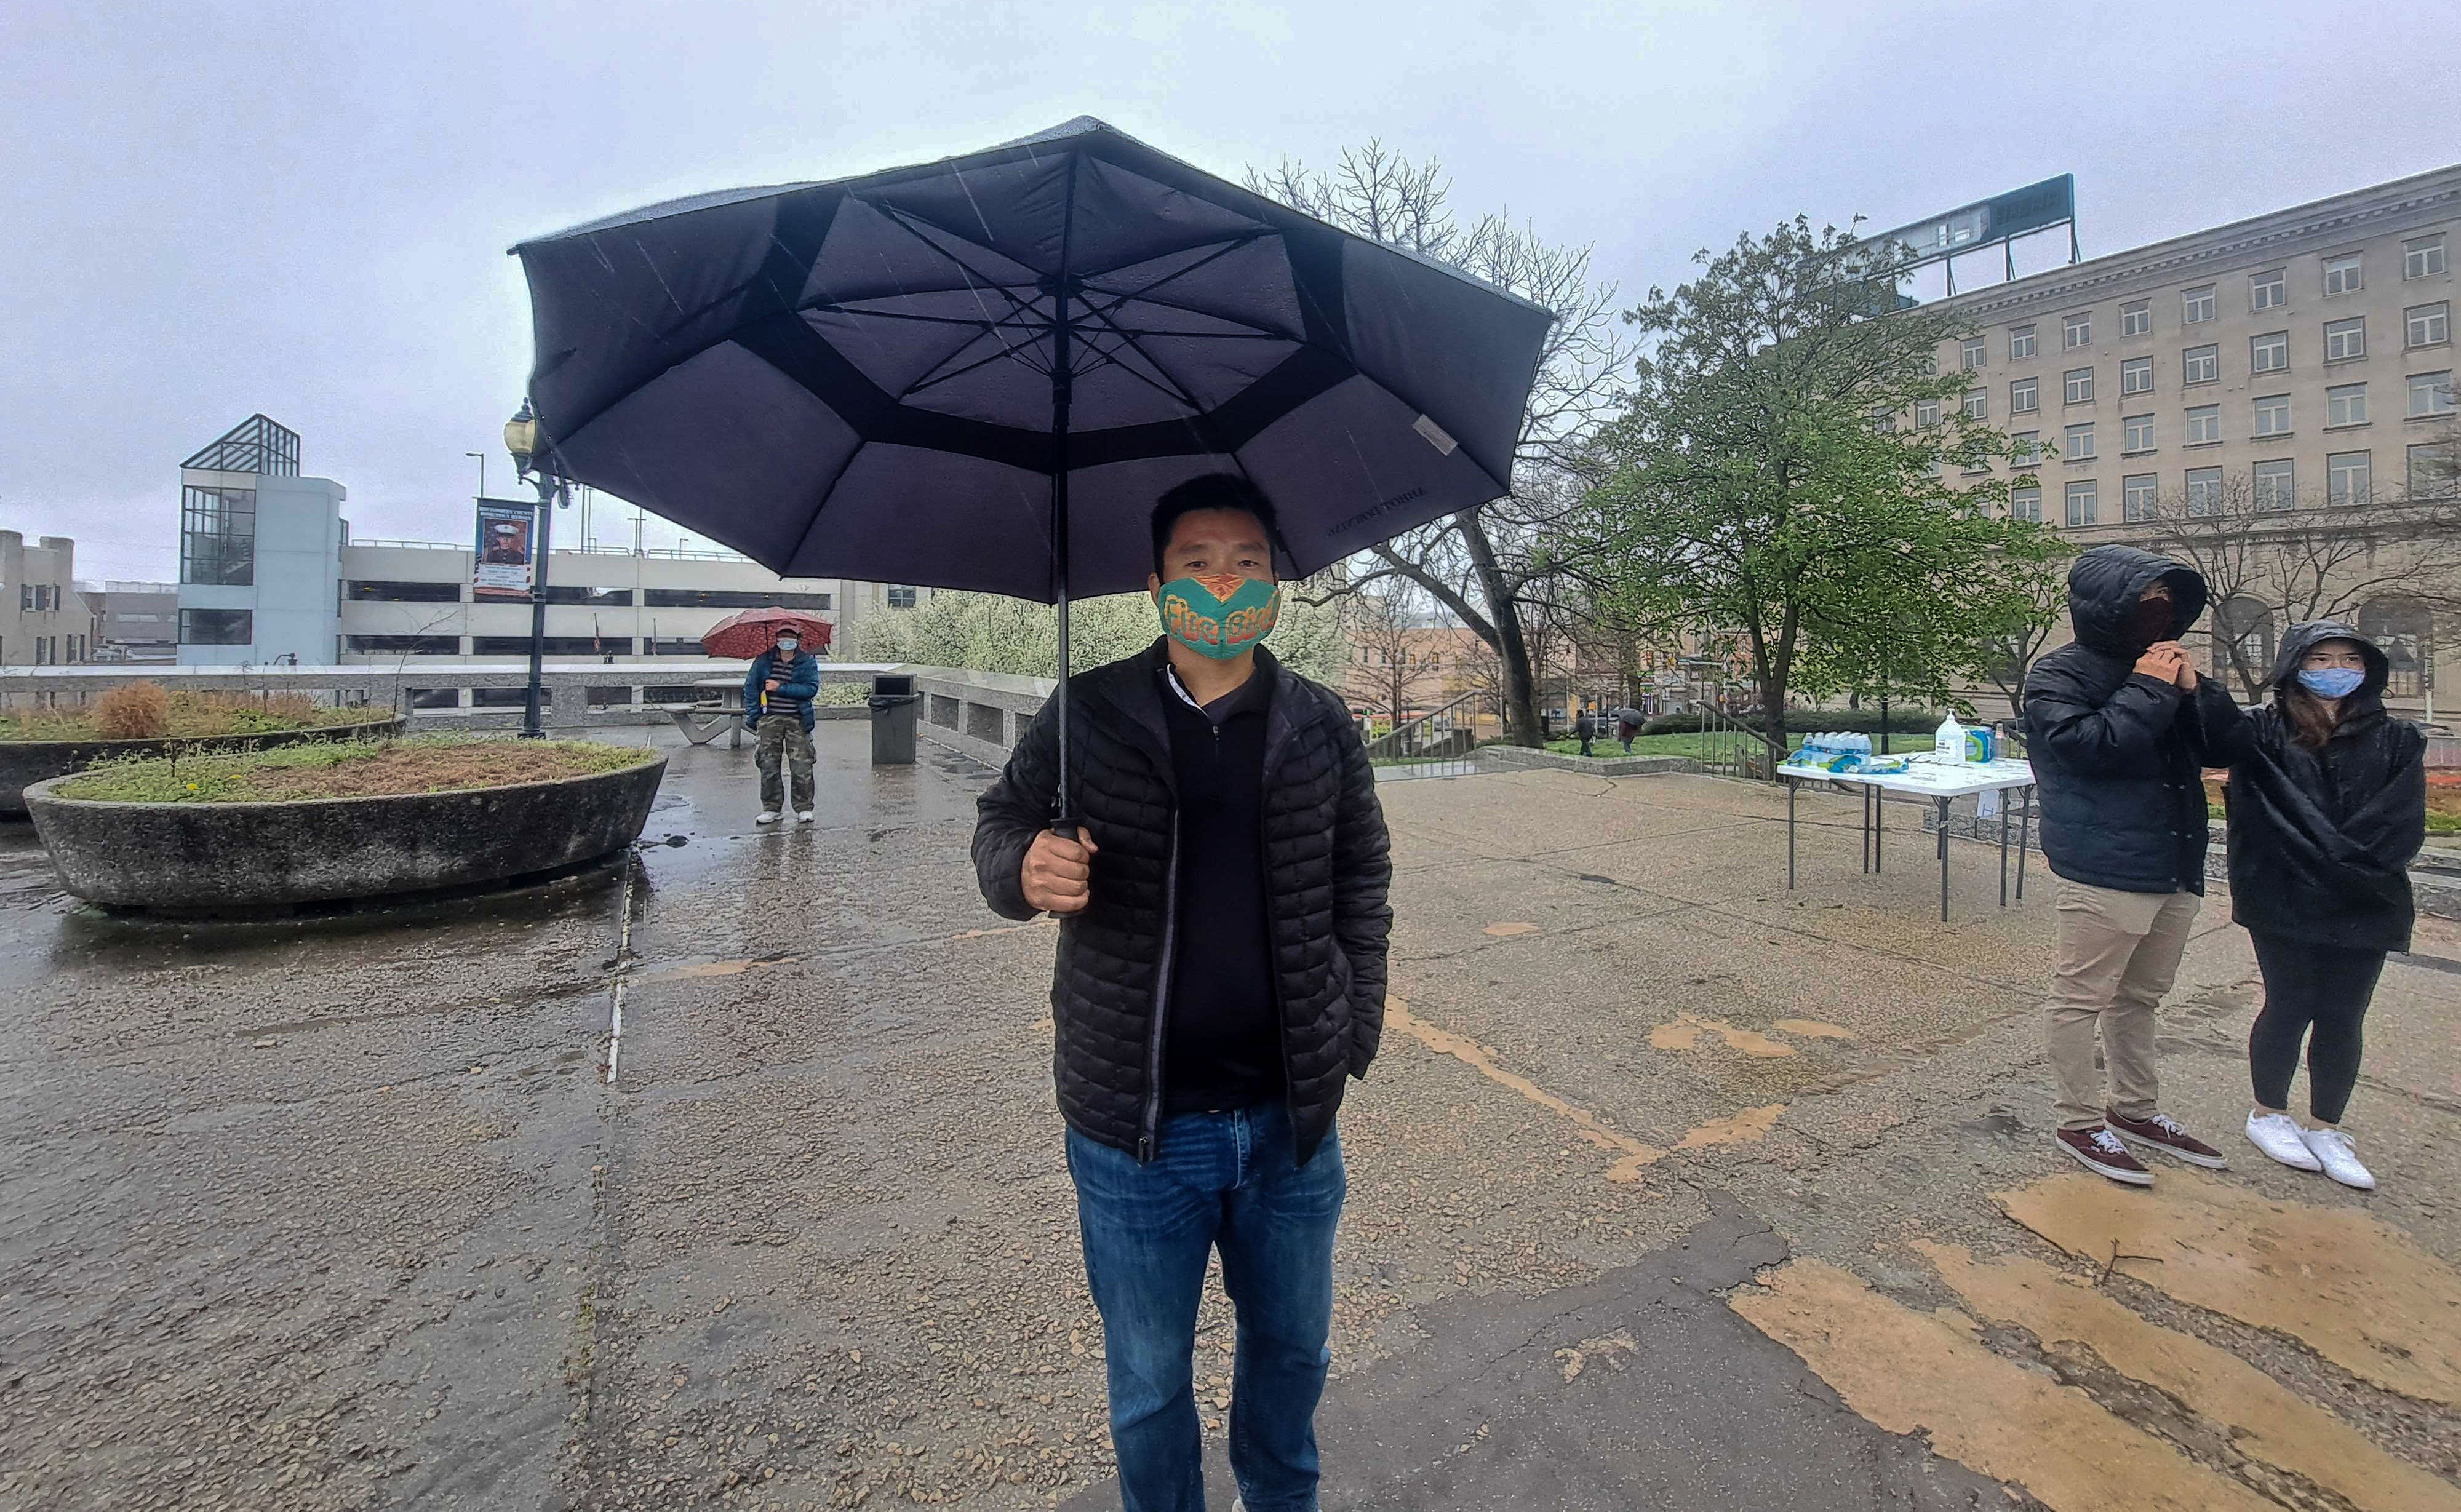 James Kim holds an umbrella while wearing a face mask